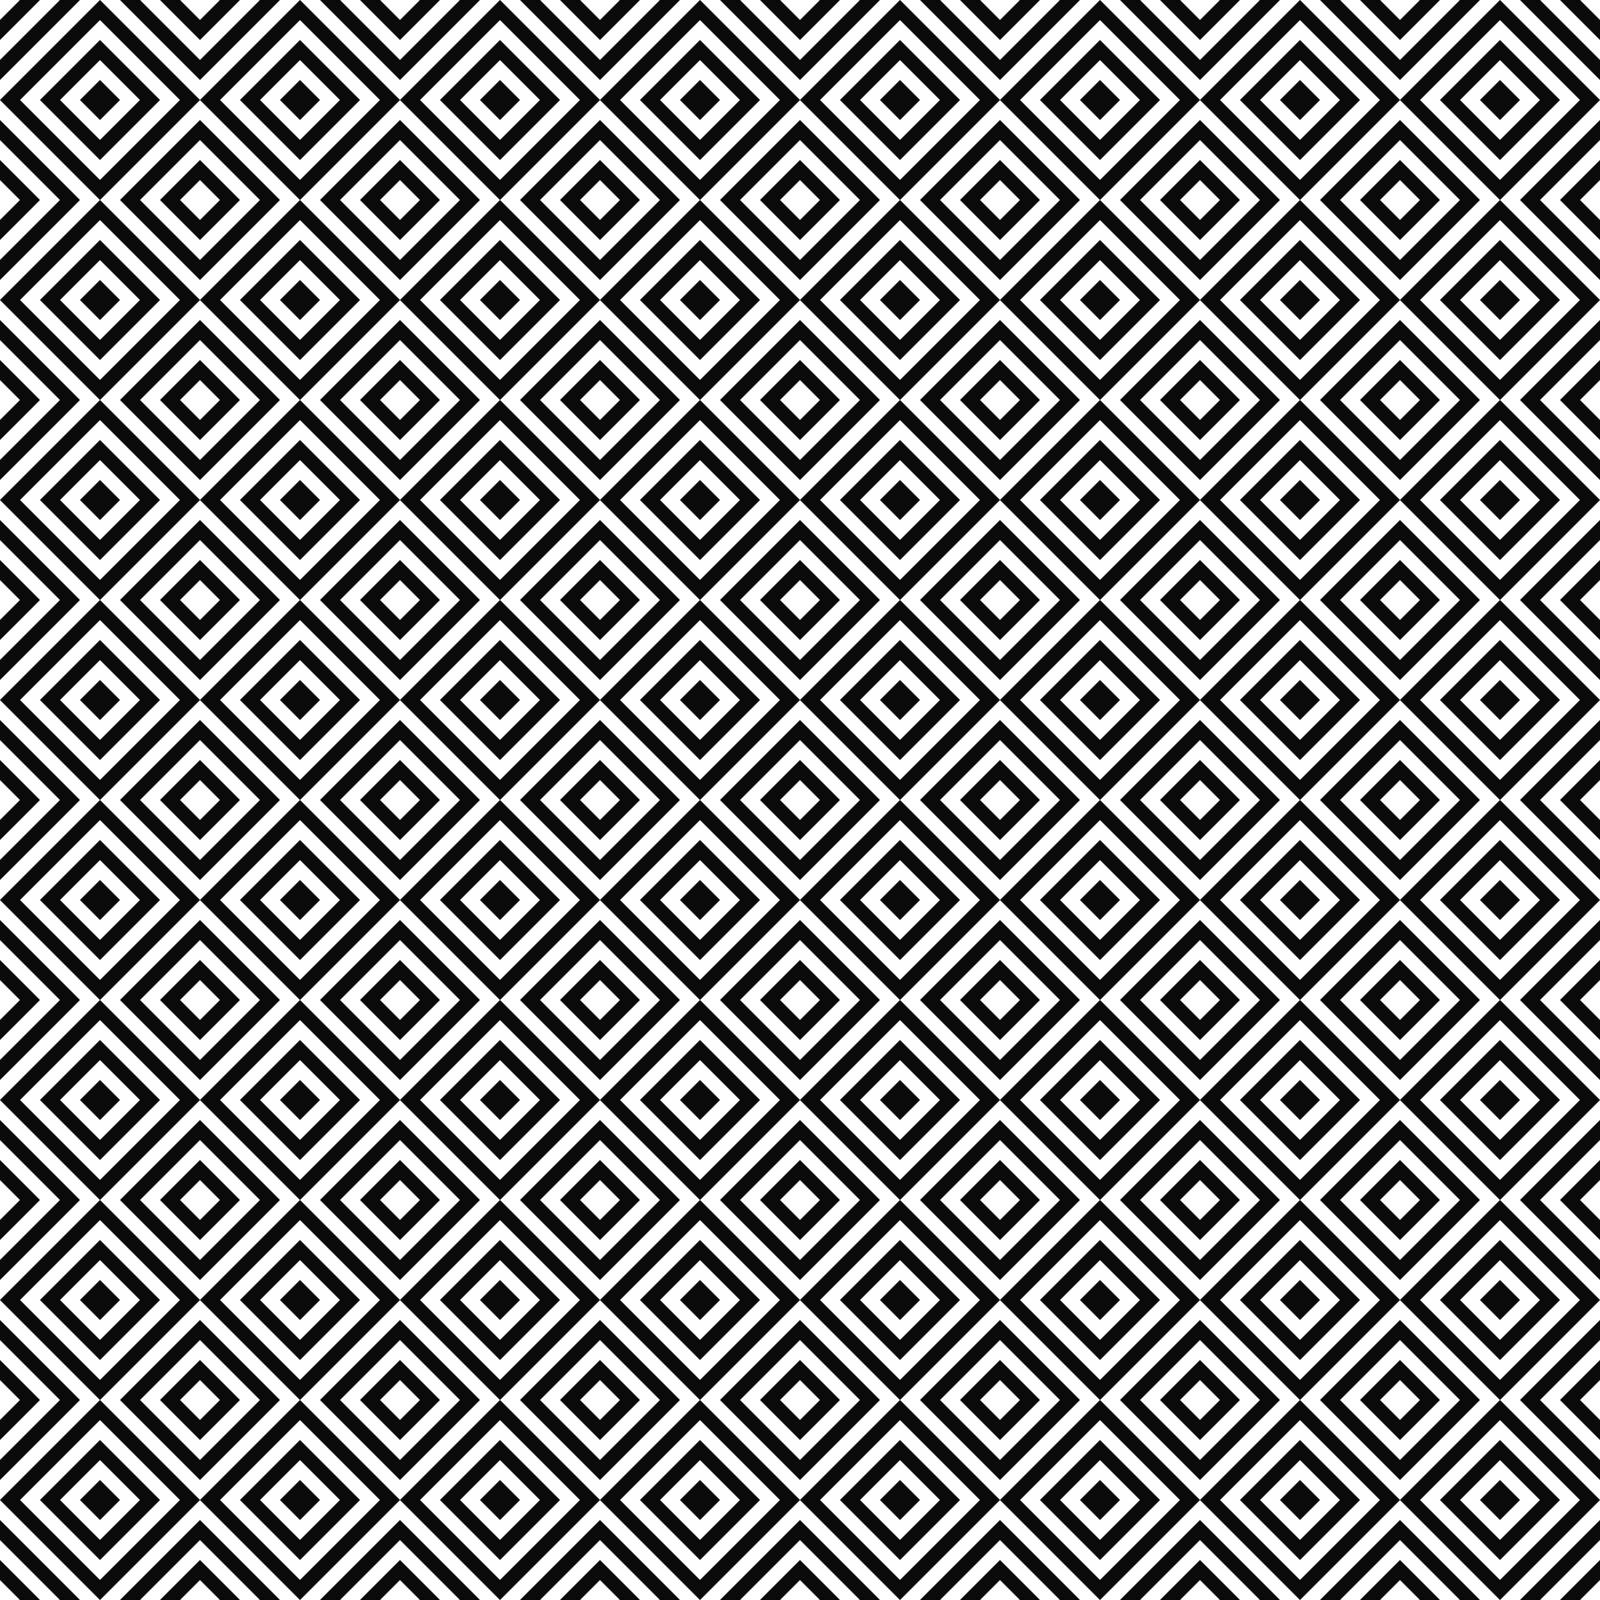 Repeating black and white square pattern by davidzydd